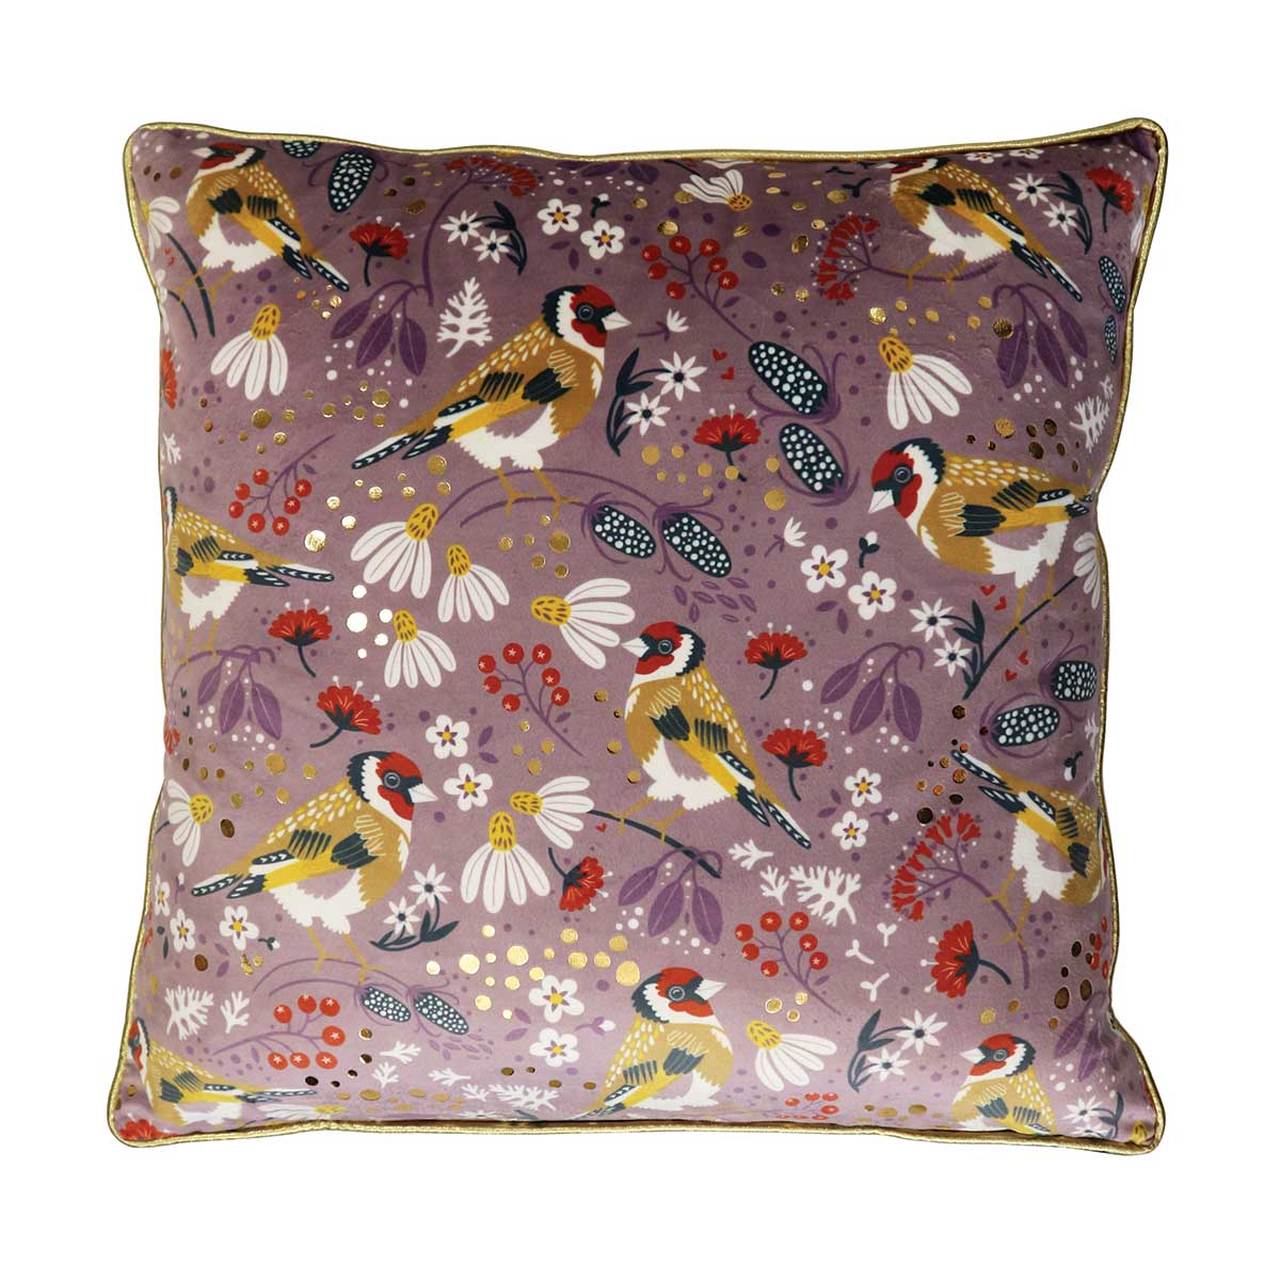 Tipperary Crystal Goldfinch Birdy Cushion  Goldfinch Tipperary Birdy Cushion by Tipperary Crystal  New to the Tipperary Crystal Birdy Collection, this plush, feather filled 45cm velvet cushion features the exquisite Goldfinch illustration and will make a bright and colourful statement in any home.